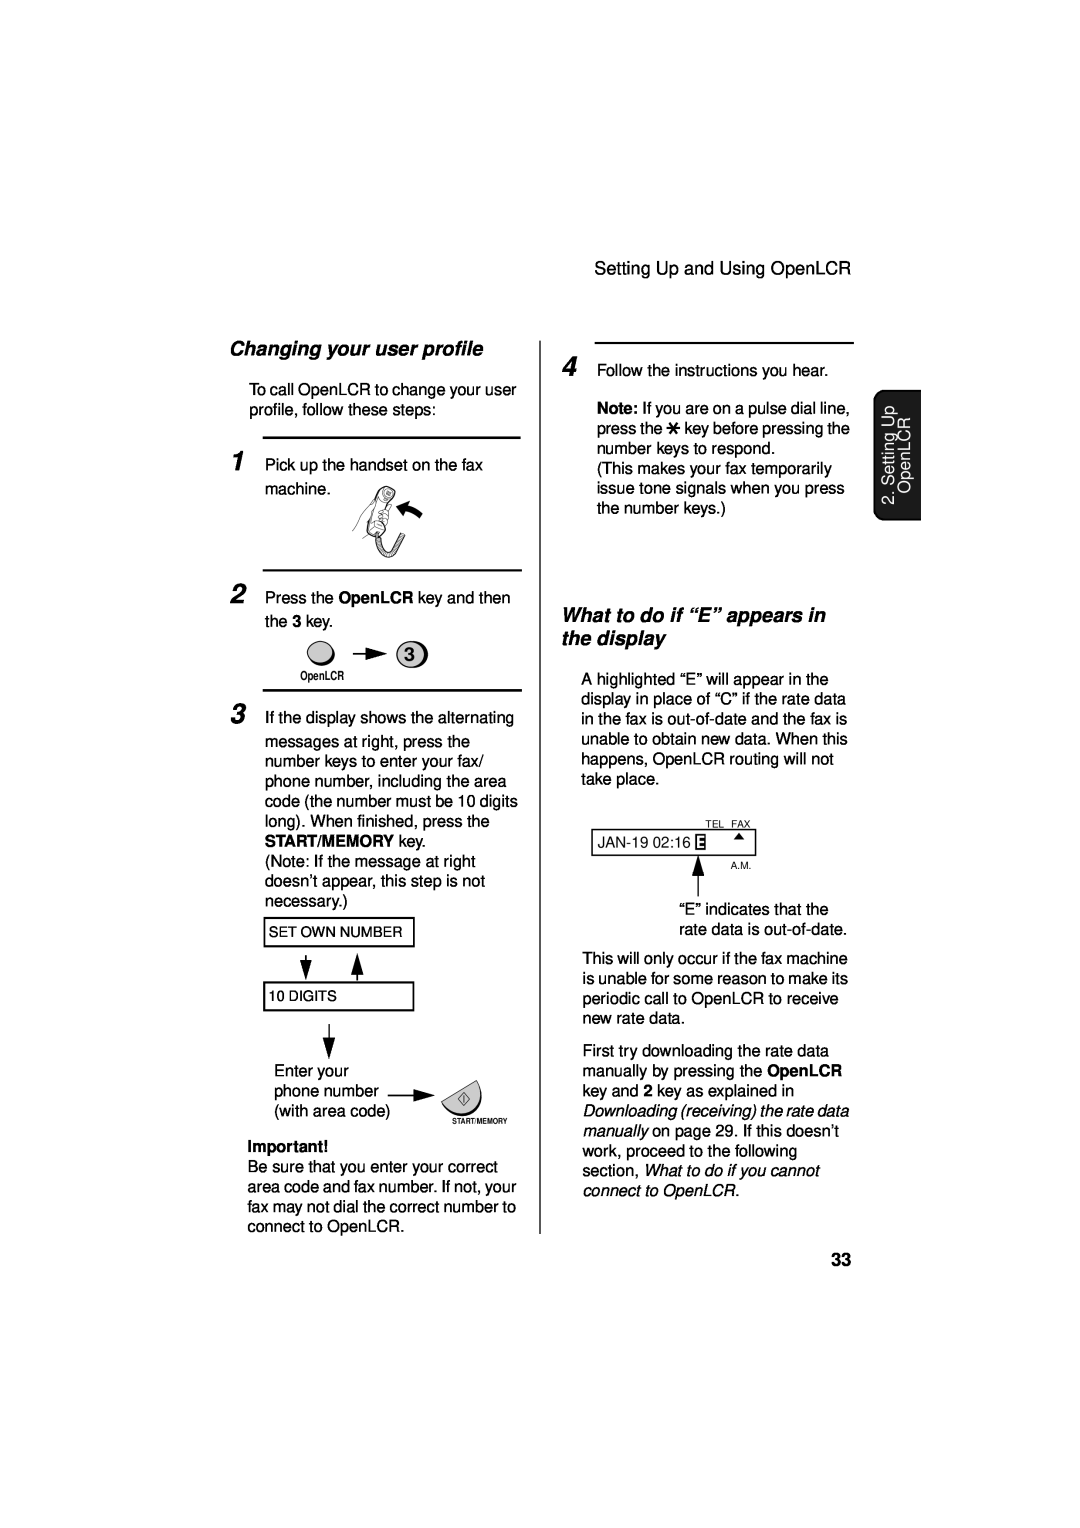 Sharp UX-340LM manual Changing your user profile, What to do if “E” appears in the display, OpenLCR 